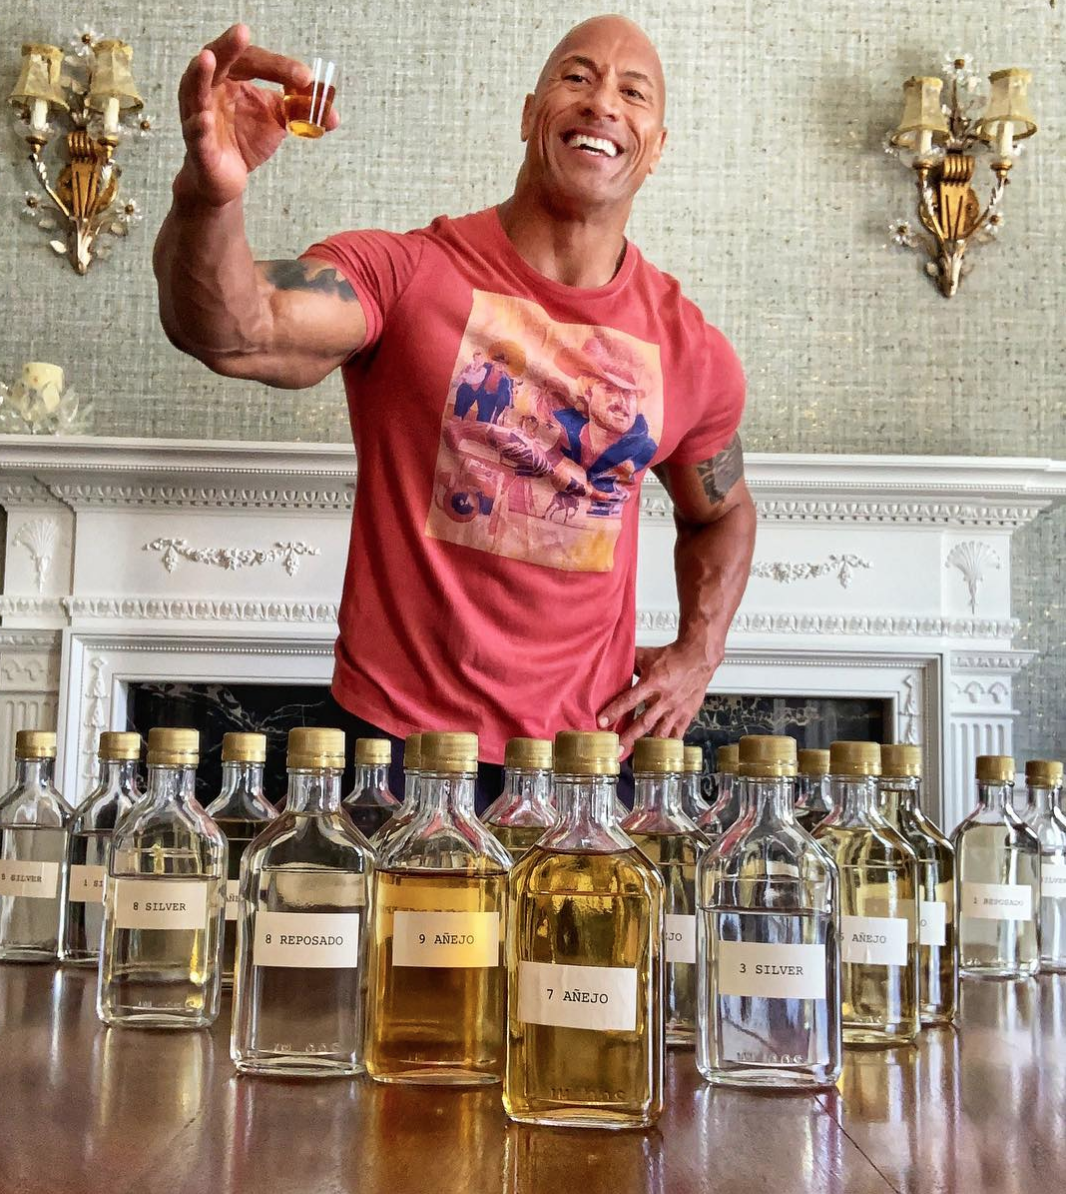 Dwayne The Rock Johnson Shared An Instagram Update About His Tequila Brand Mana Tequila